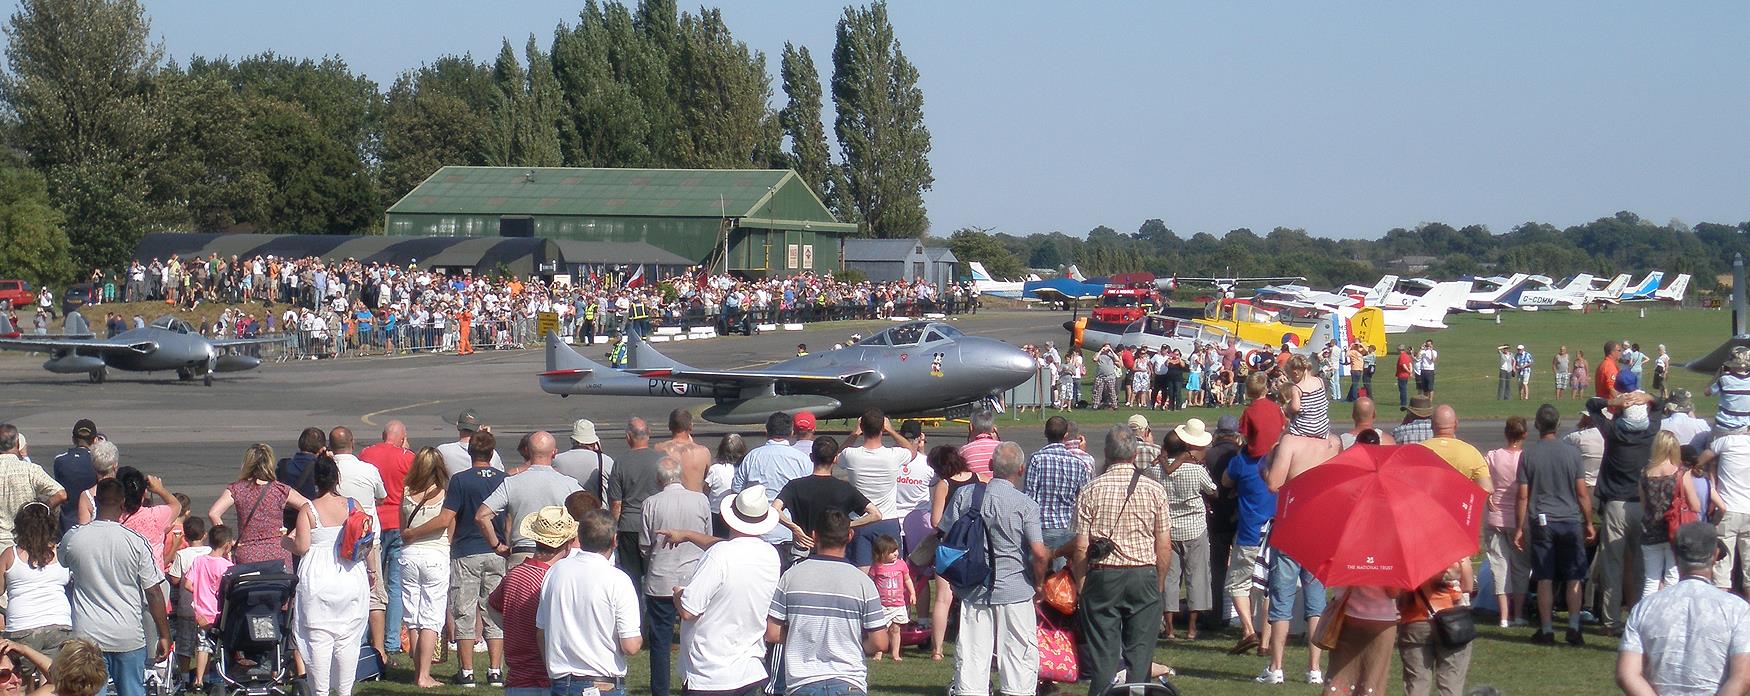 aircraft on display and crowds at North Weald Airfield